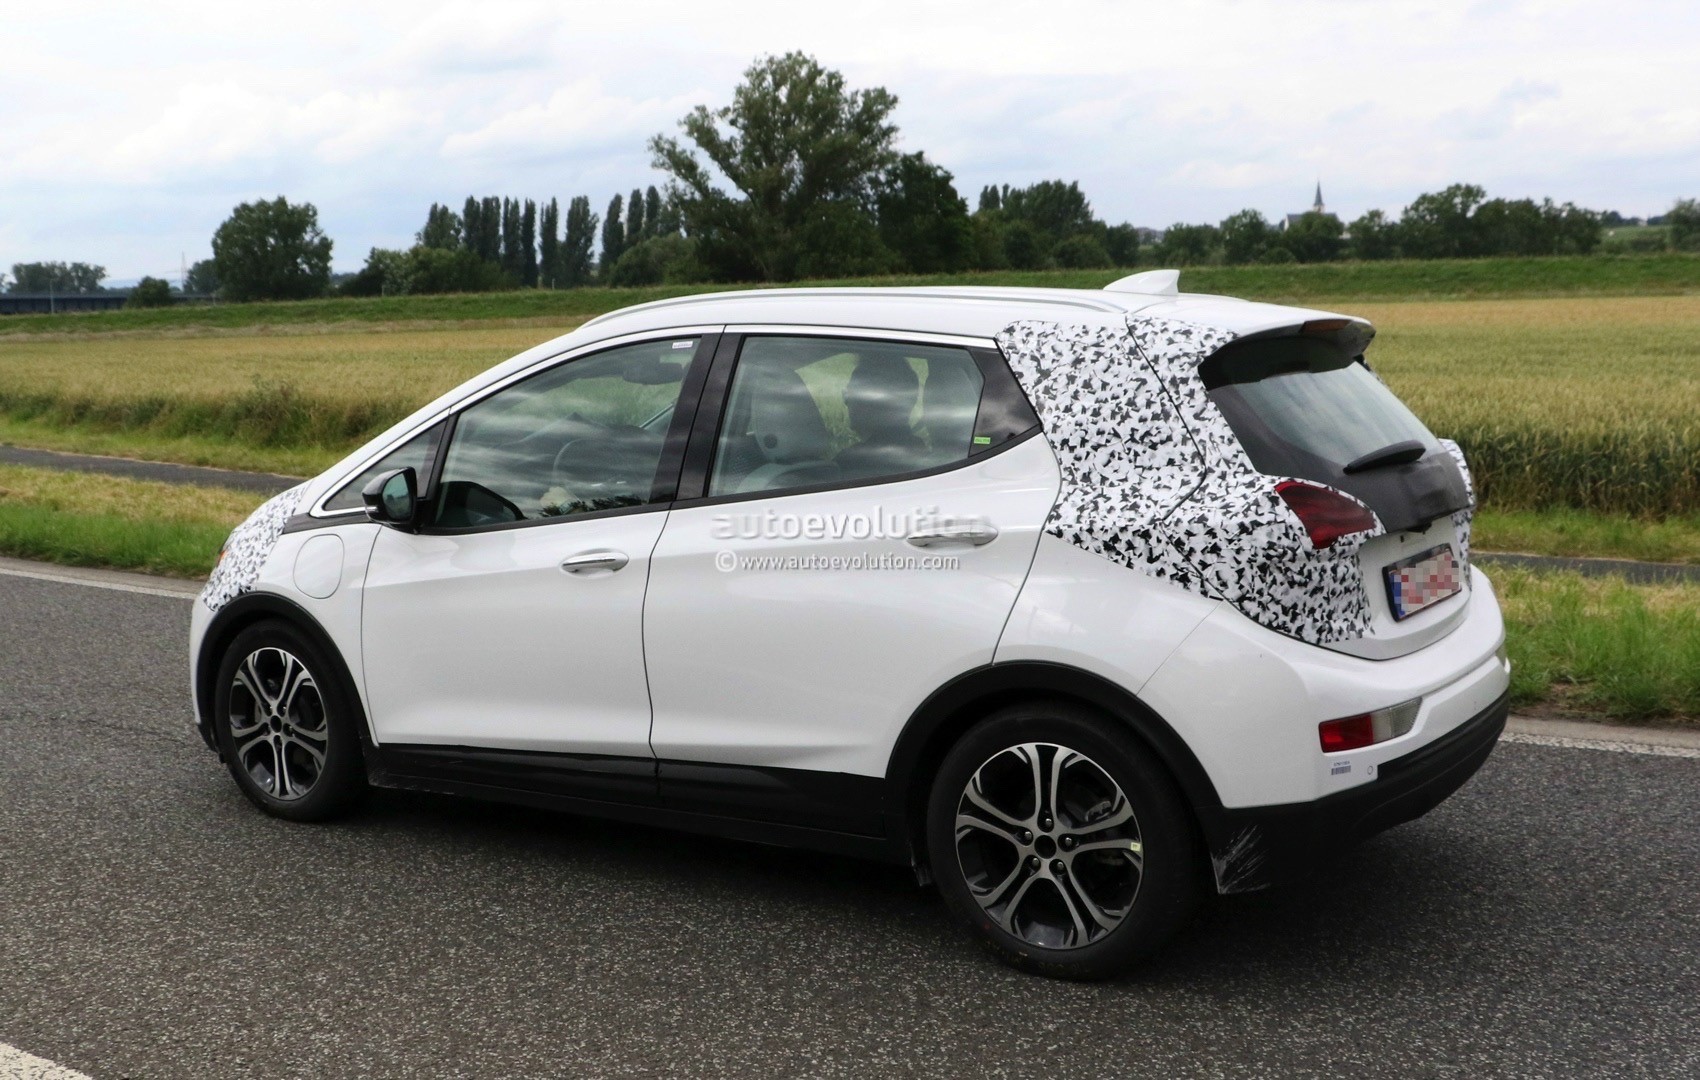 2017-opel-ampera-e-spied-in-germany-looks-almost-ready-for-production_6.jpg